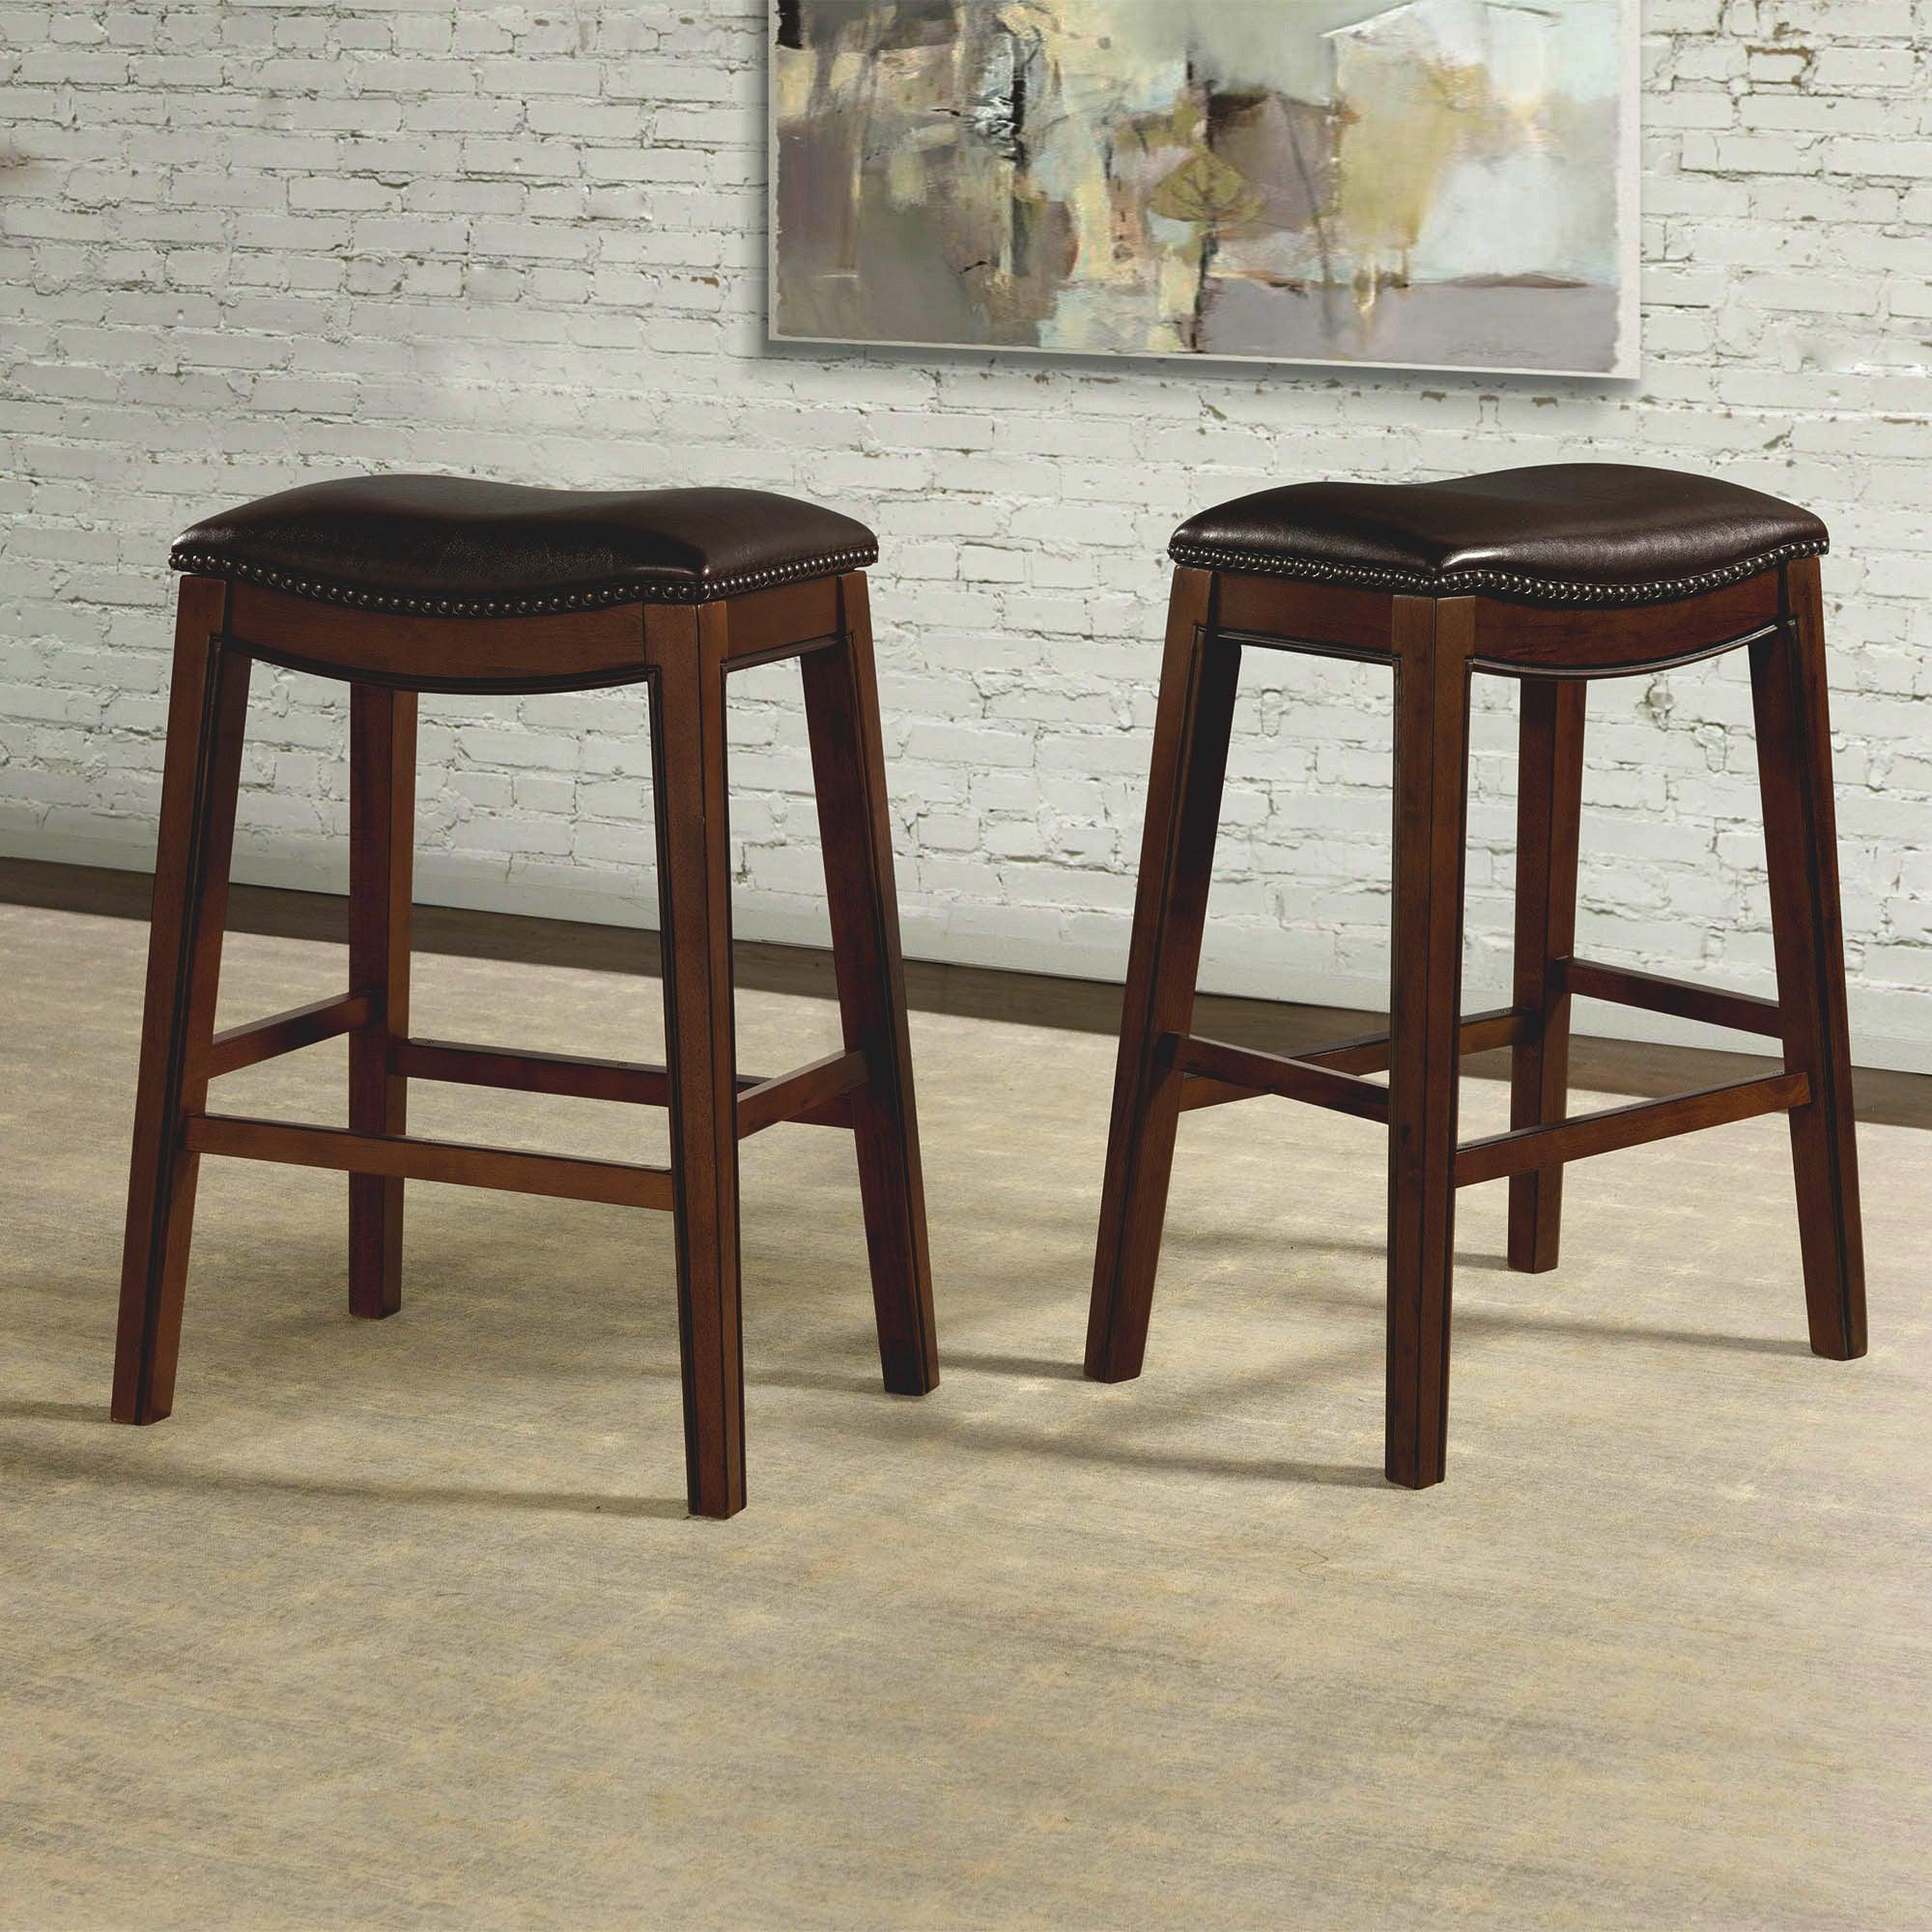 Elements Barstools - Bowen 30" Backless Bar Stool in Brown